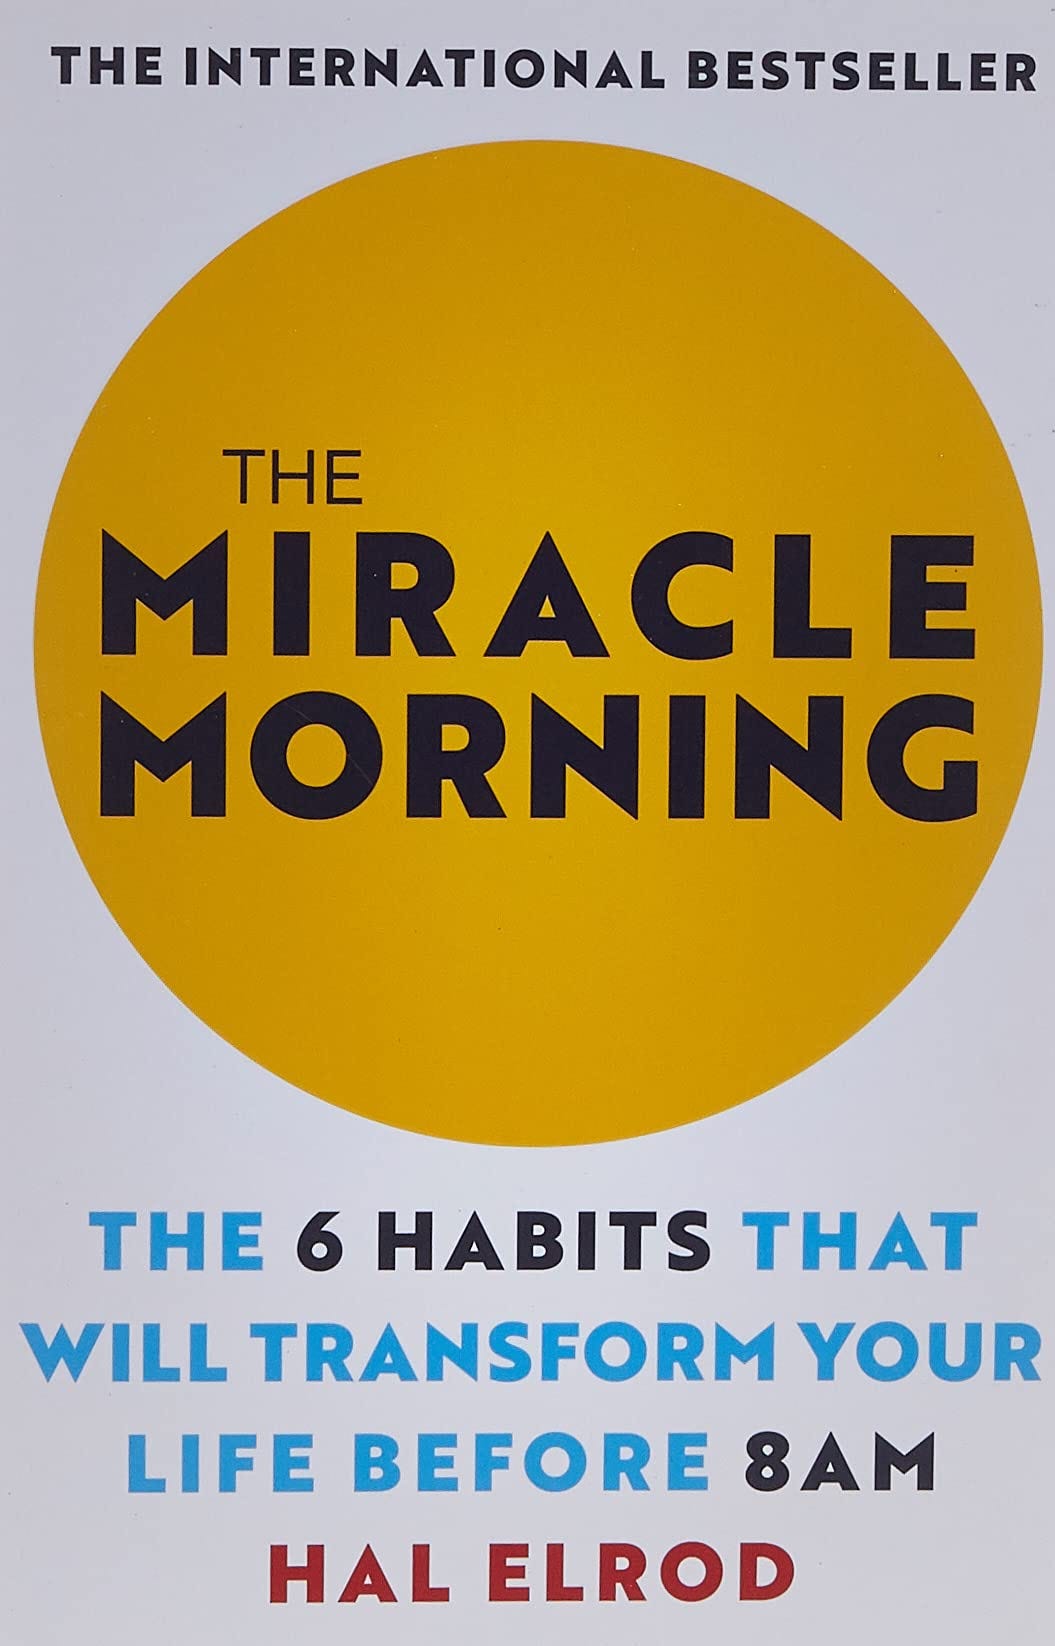 The Miracle Morning: Can This Book Change Your Life?